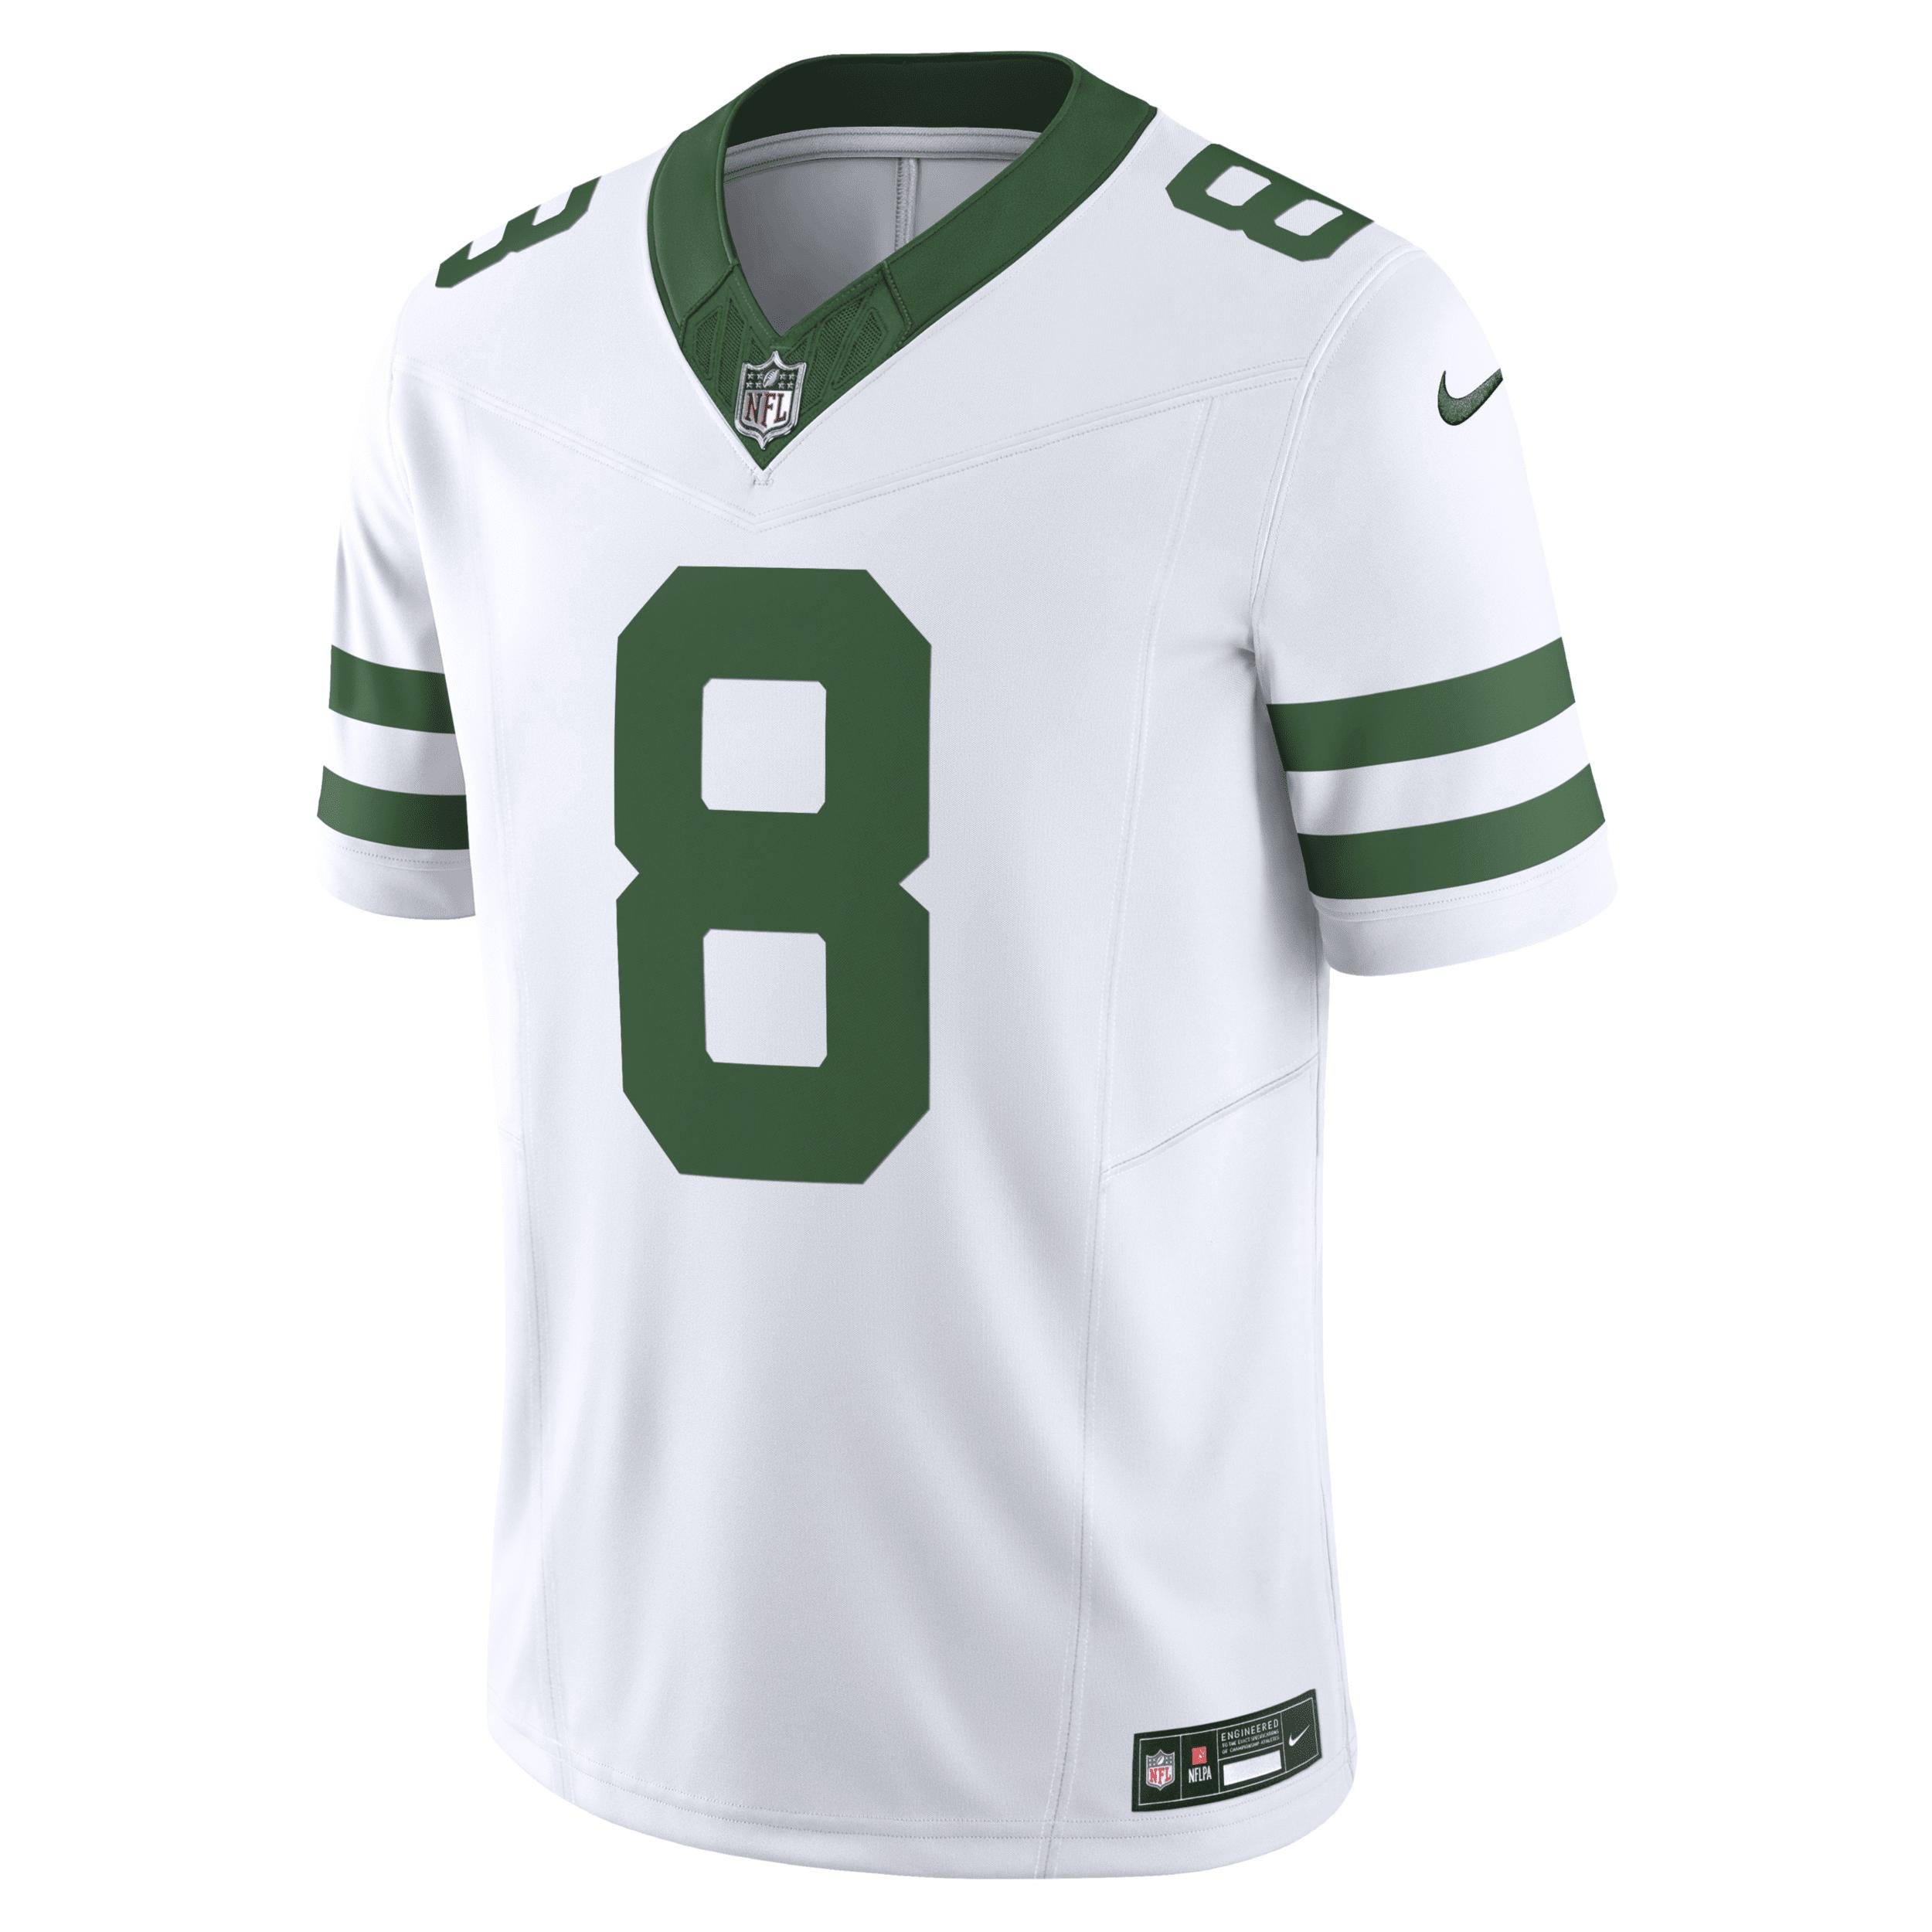 Aaron Rodgers New York Jets Nike Men's Dri-FIT NFL Limited Football Jersey by NIKE